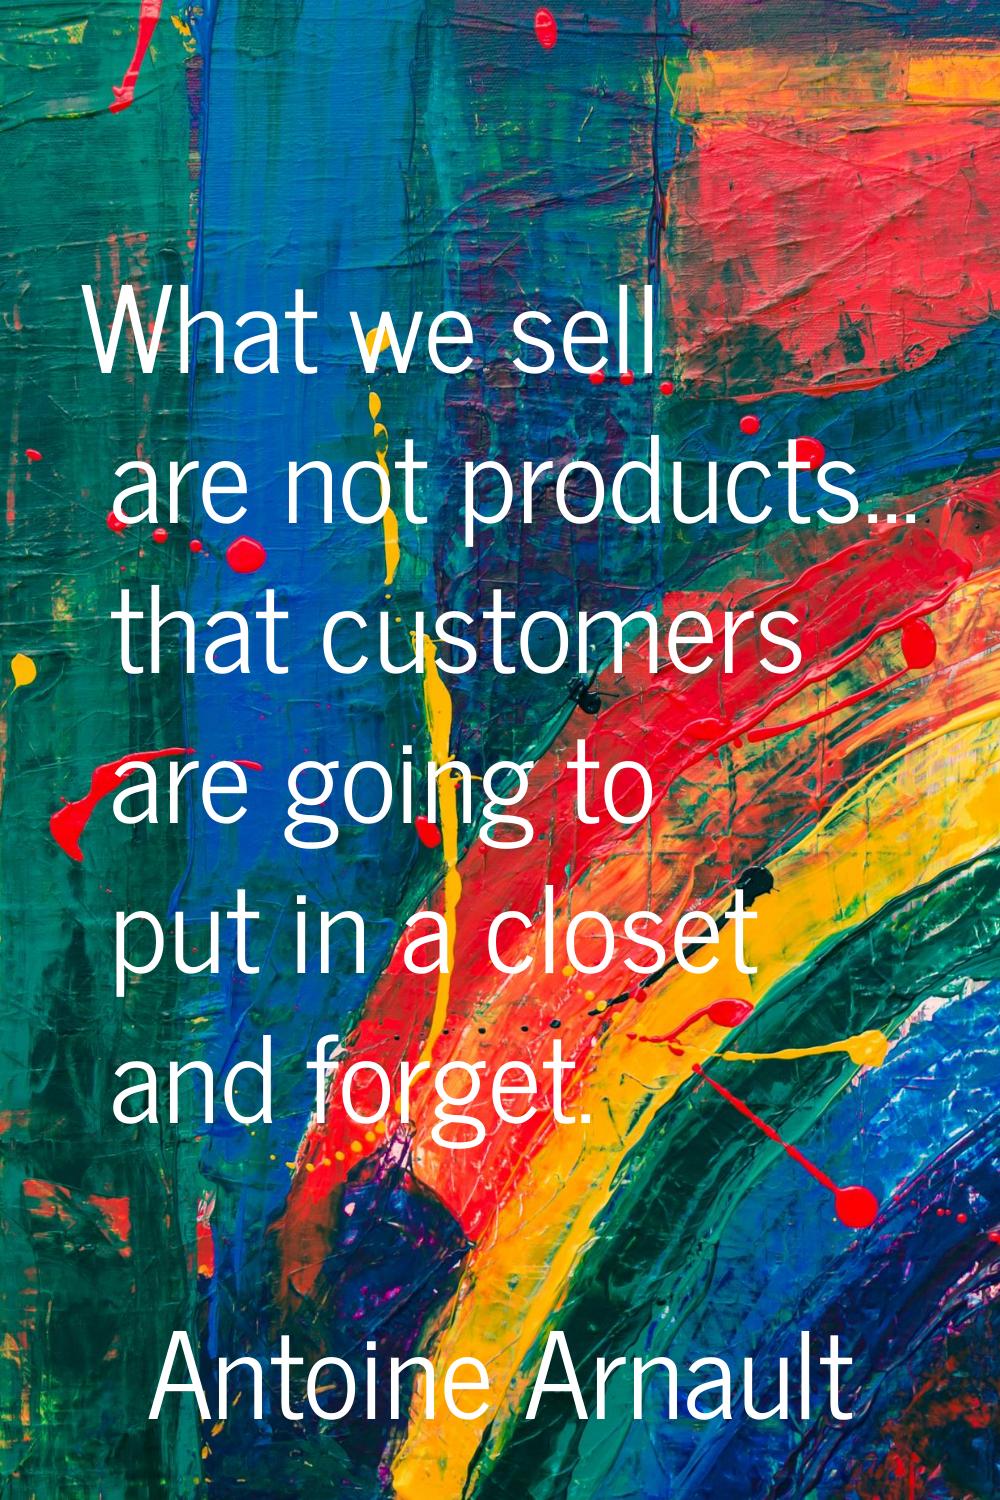 What we sell are not products... that customers are going to put in a closet and forget.